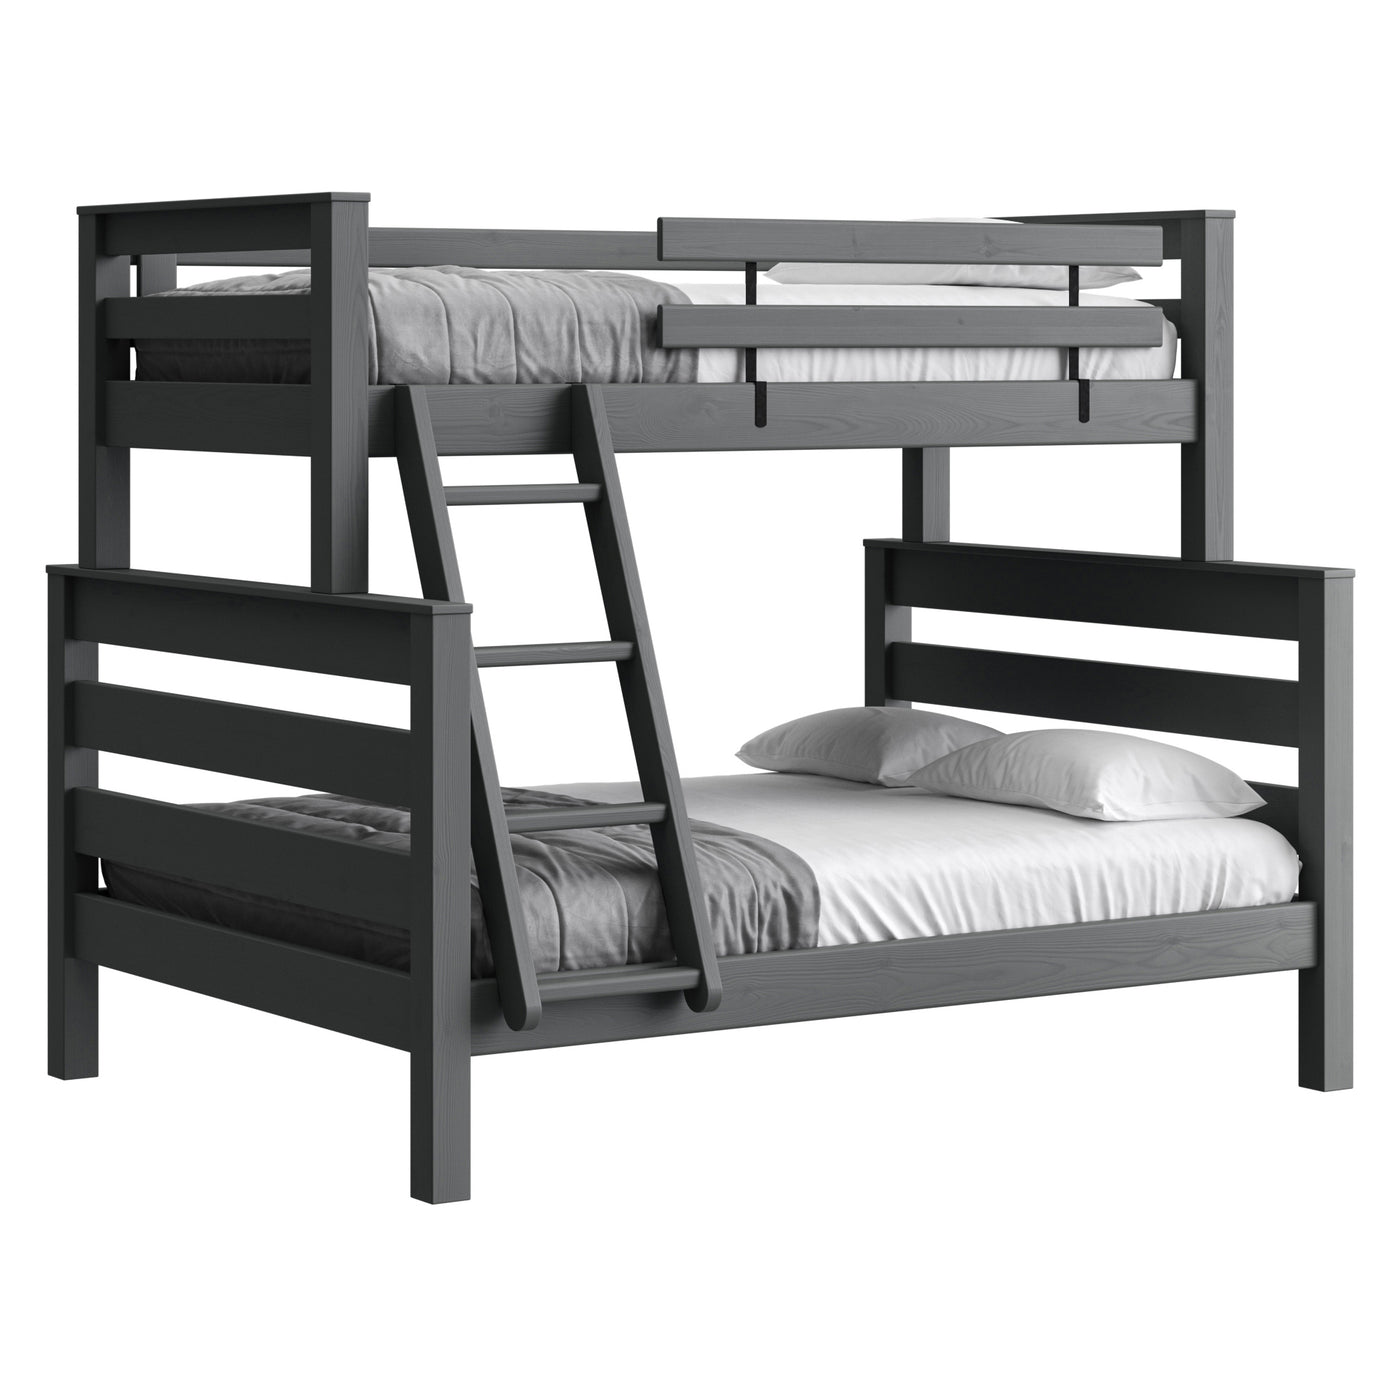 https://cratedesignsfurniture.com/cdn/shop/files/G43958h-bunk-bed-timberframe-73-inch-high-twinxl-over-queen-size-with-ladder-graphite-finish_1400x.jpg?v=1683675223